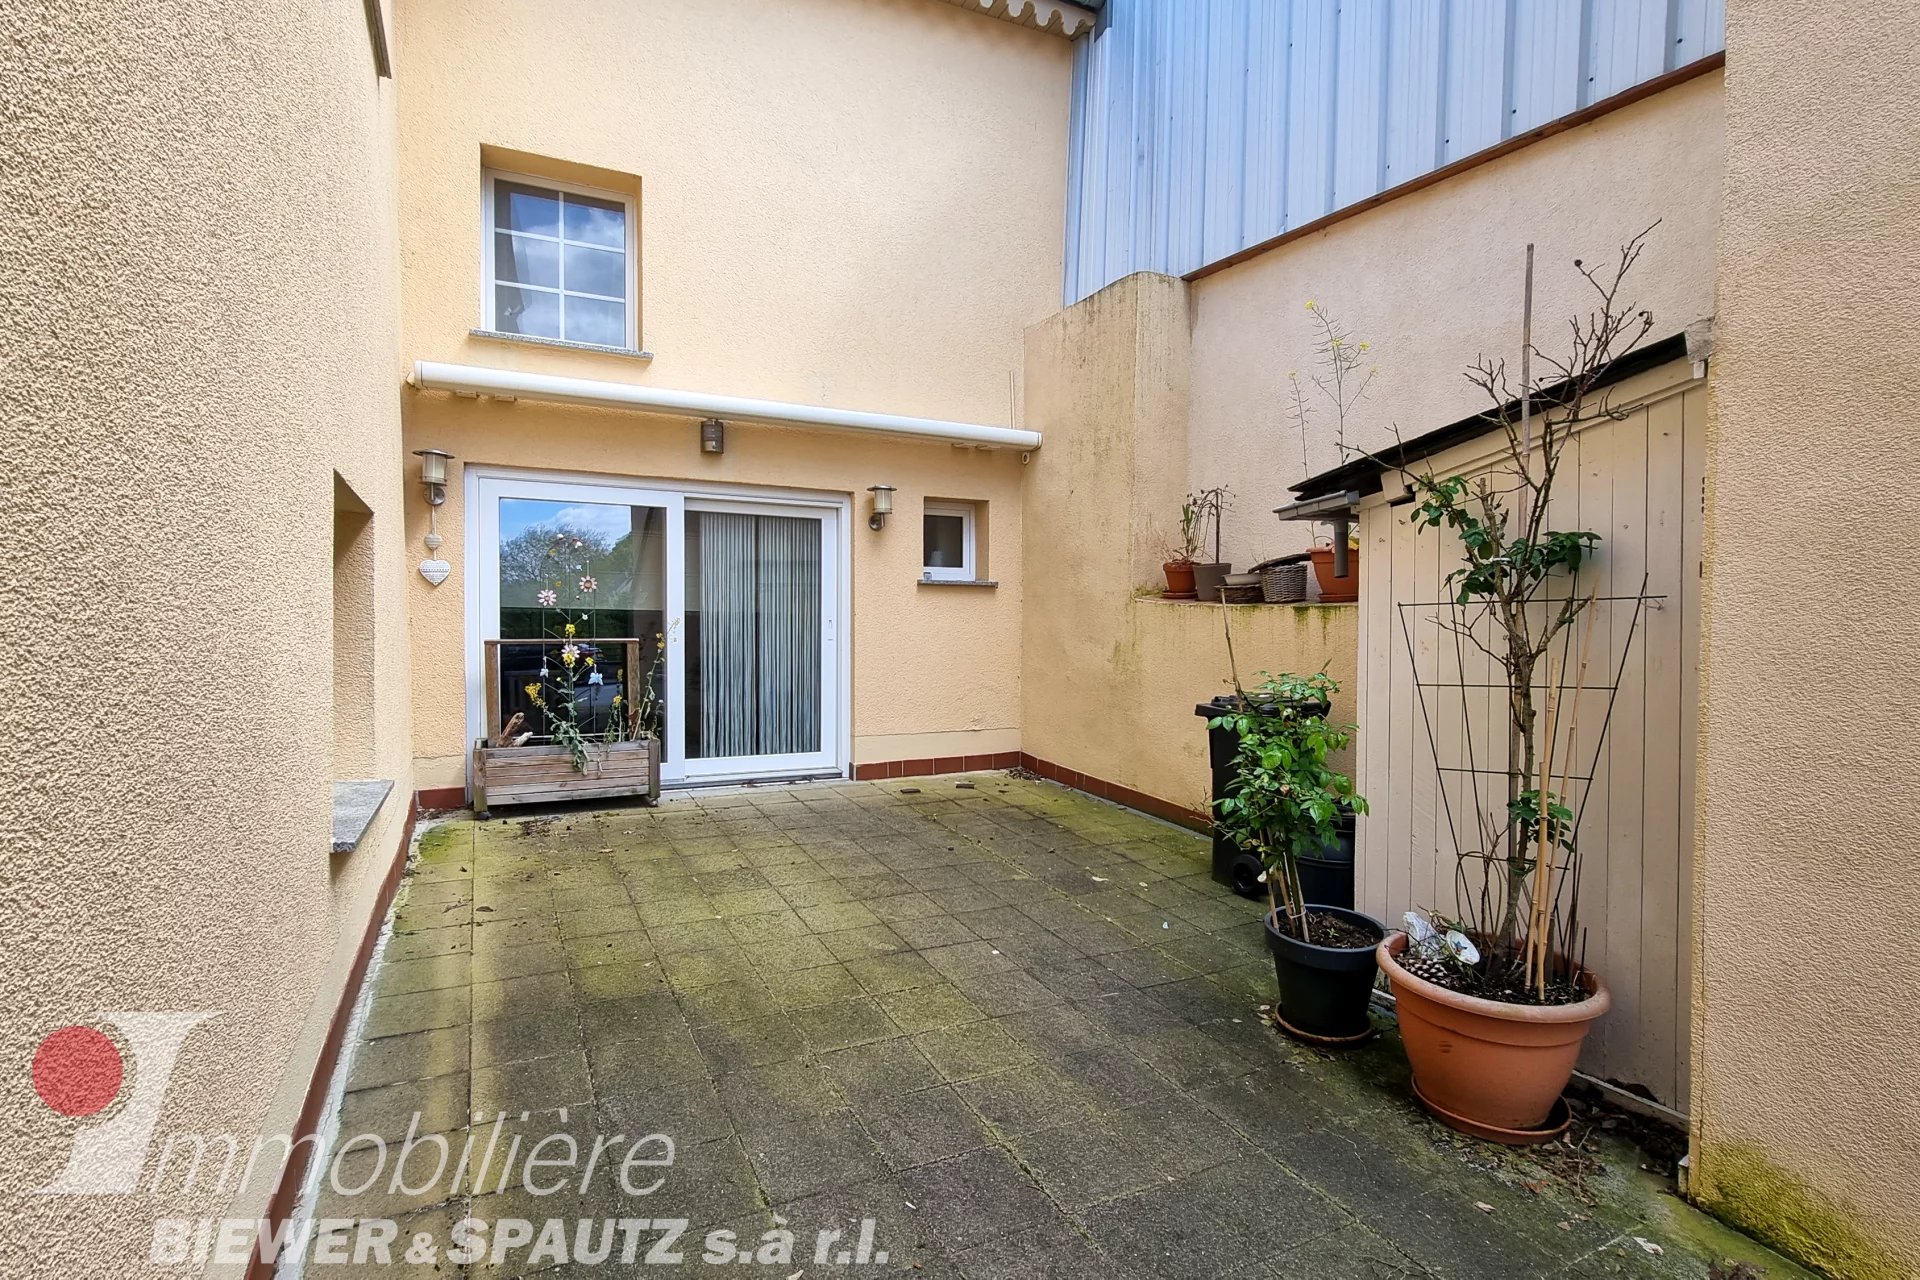 SOLD - semi-detached house with 3 bedrooms in Bourglinster